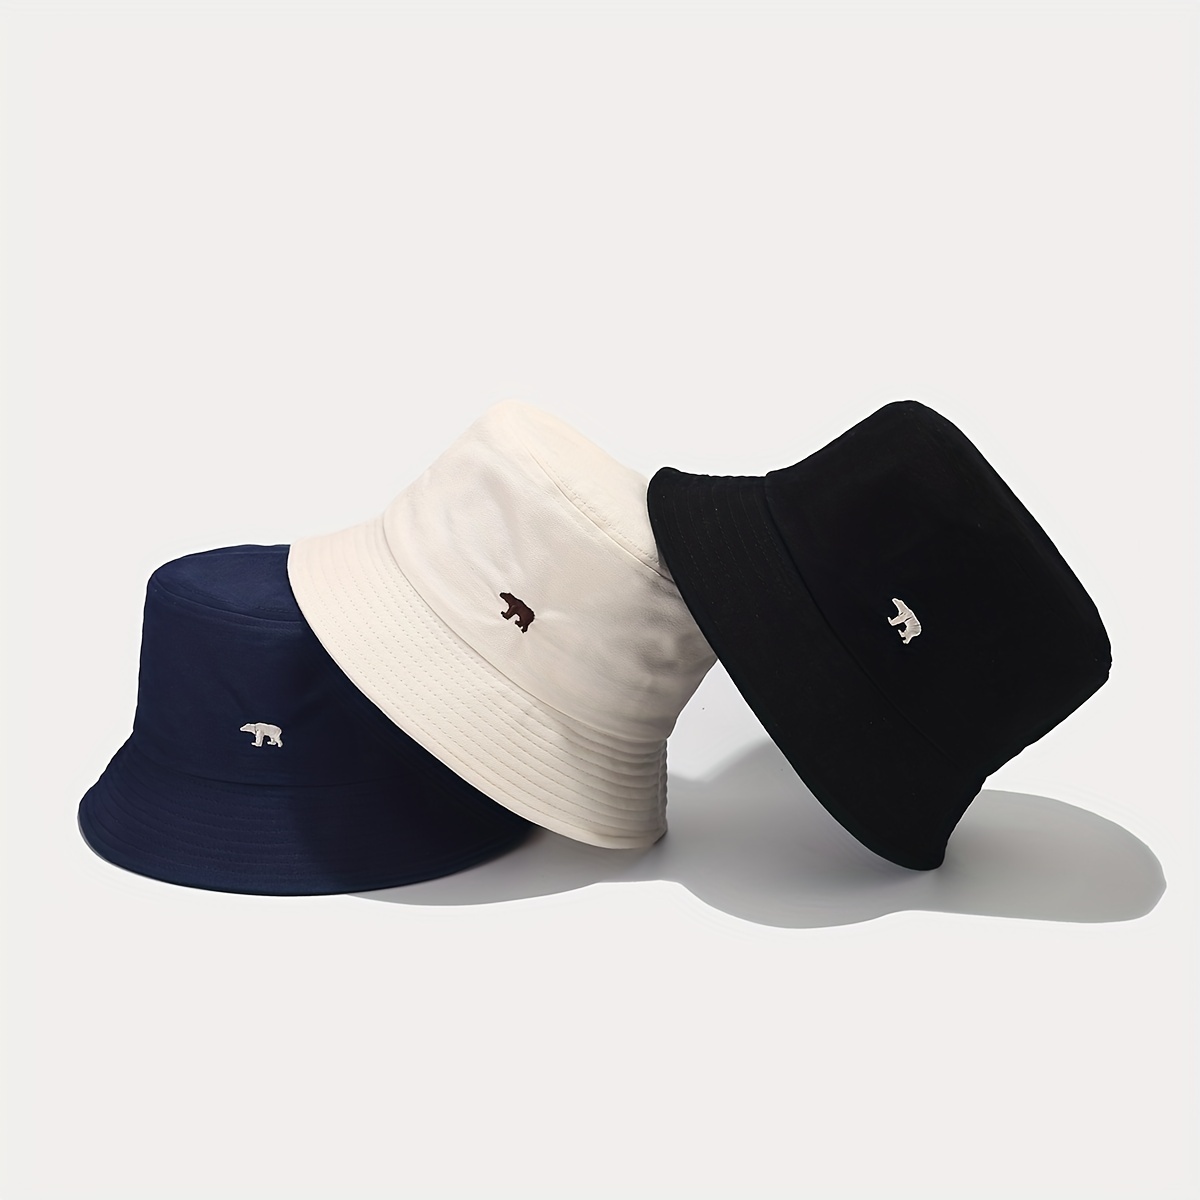 1pc Cute Bear Embroidery Bucket Hat For Men And Women Simple Basin